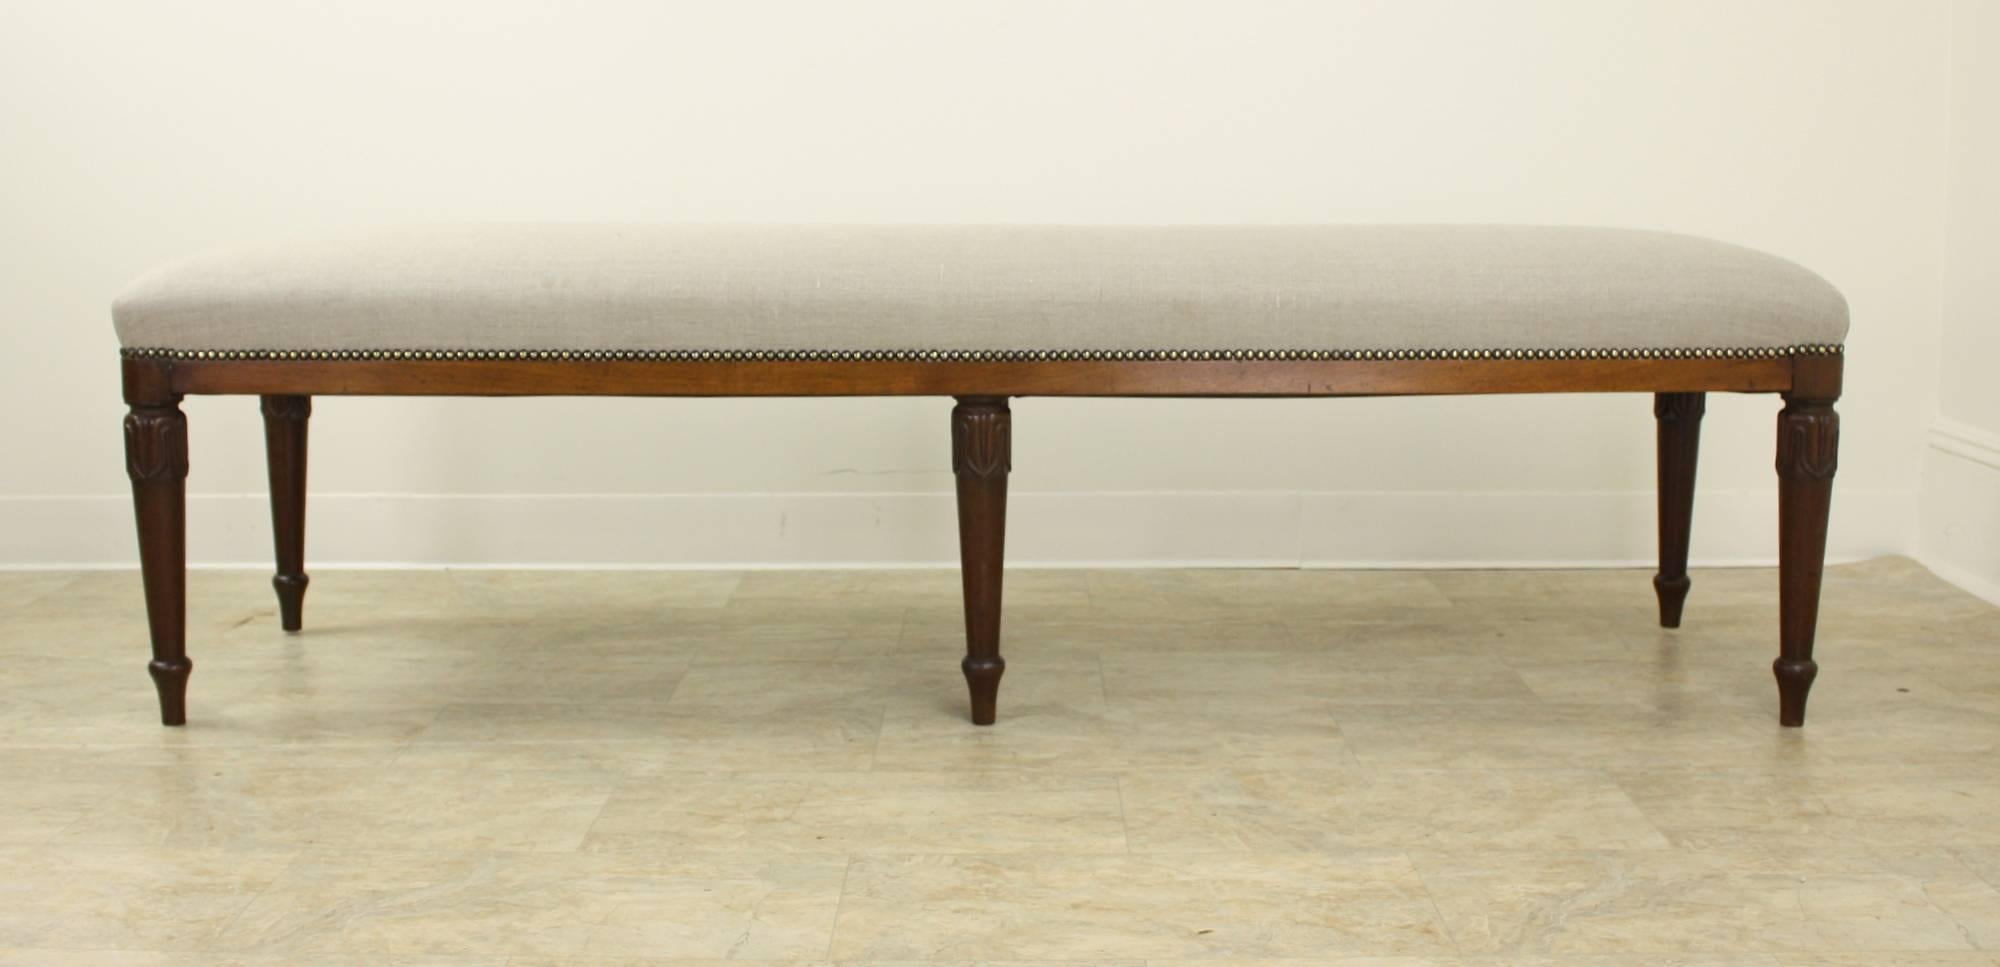 An elegant long stool newly covered in French beige linen, with brass decorative upholstery nails. Constructed with  mahogany legs c1840 that are well-carved and sturdy. Very good sitting-height, comfortable seating. Suitable as a long ottoman in